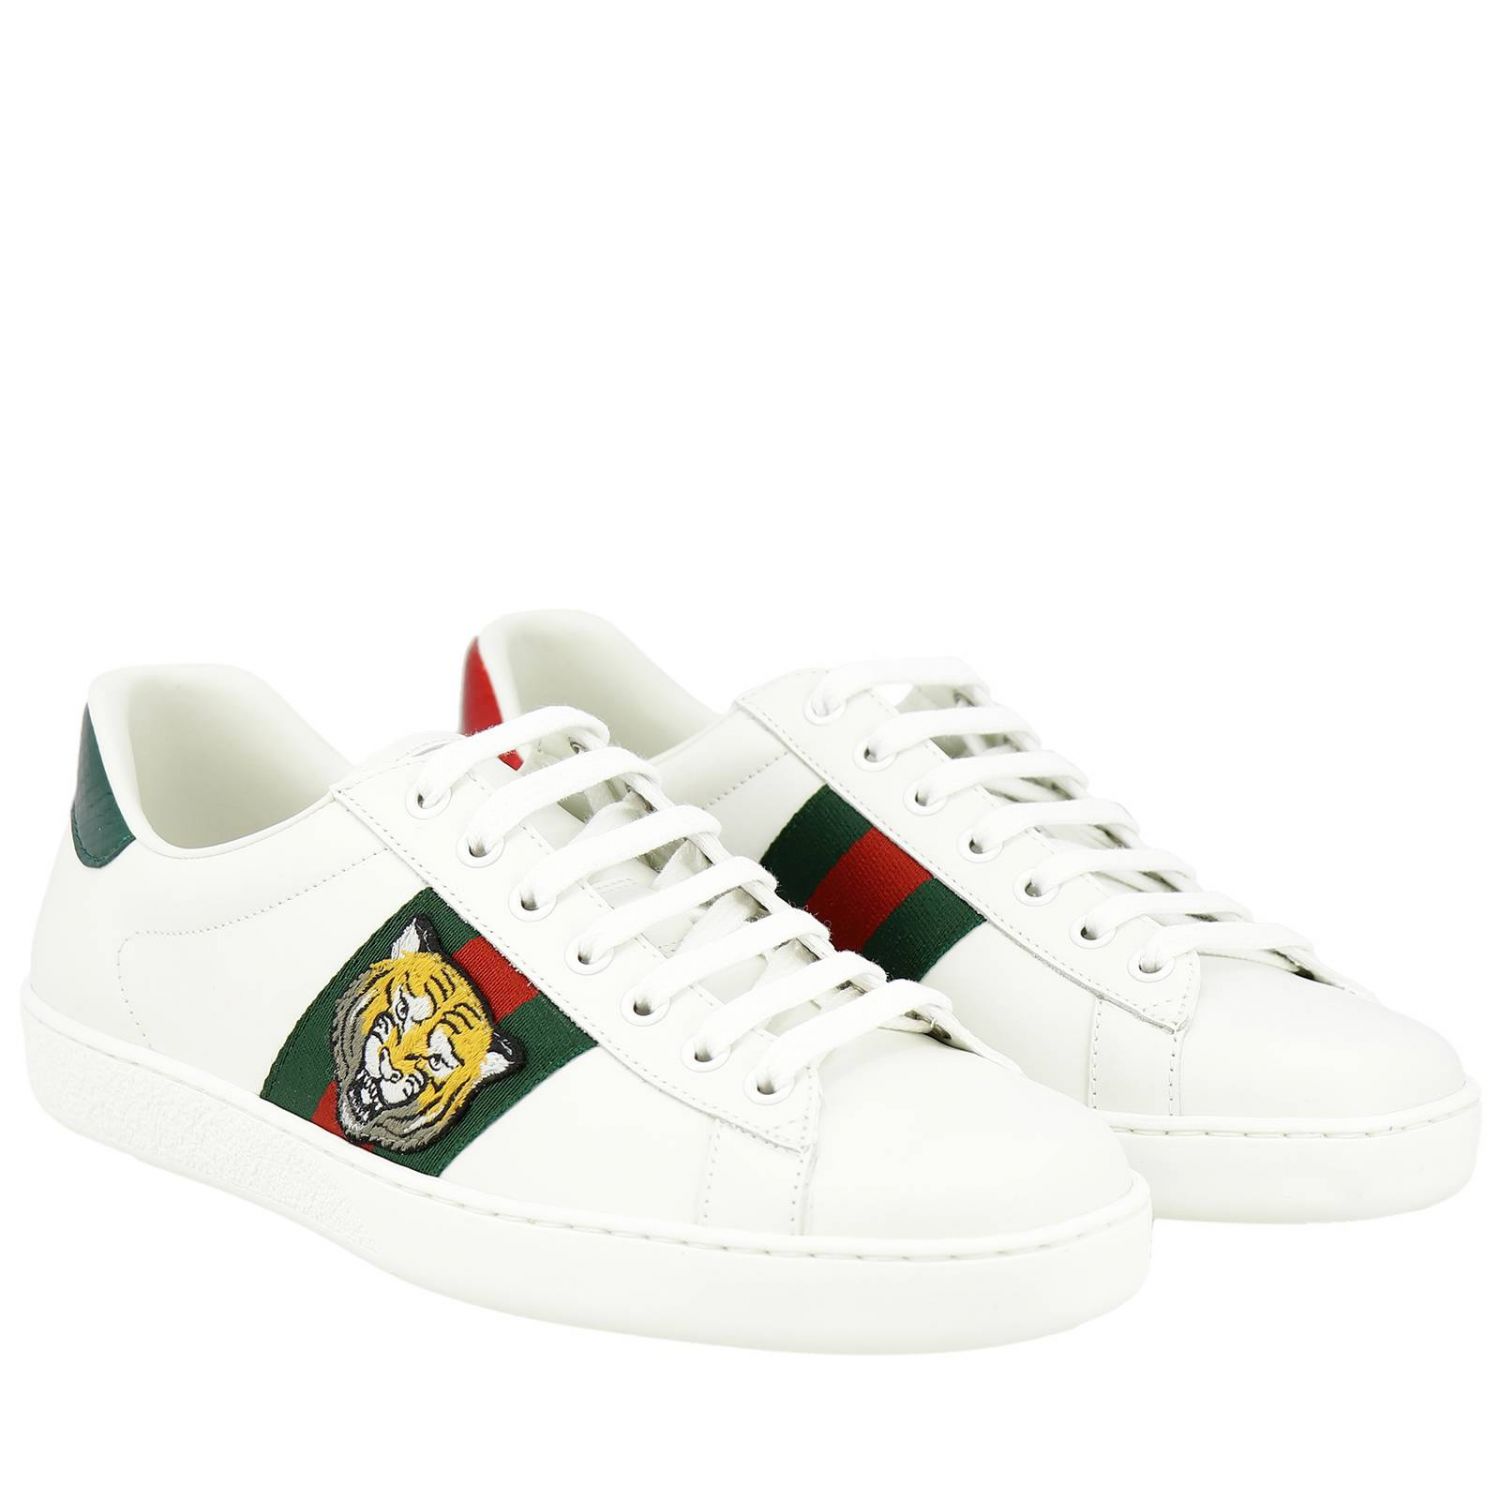 GUCCI: New Ace lace-up sneakers in smooth leather with Web bands and ...